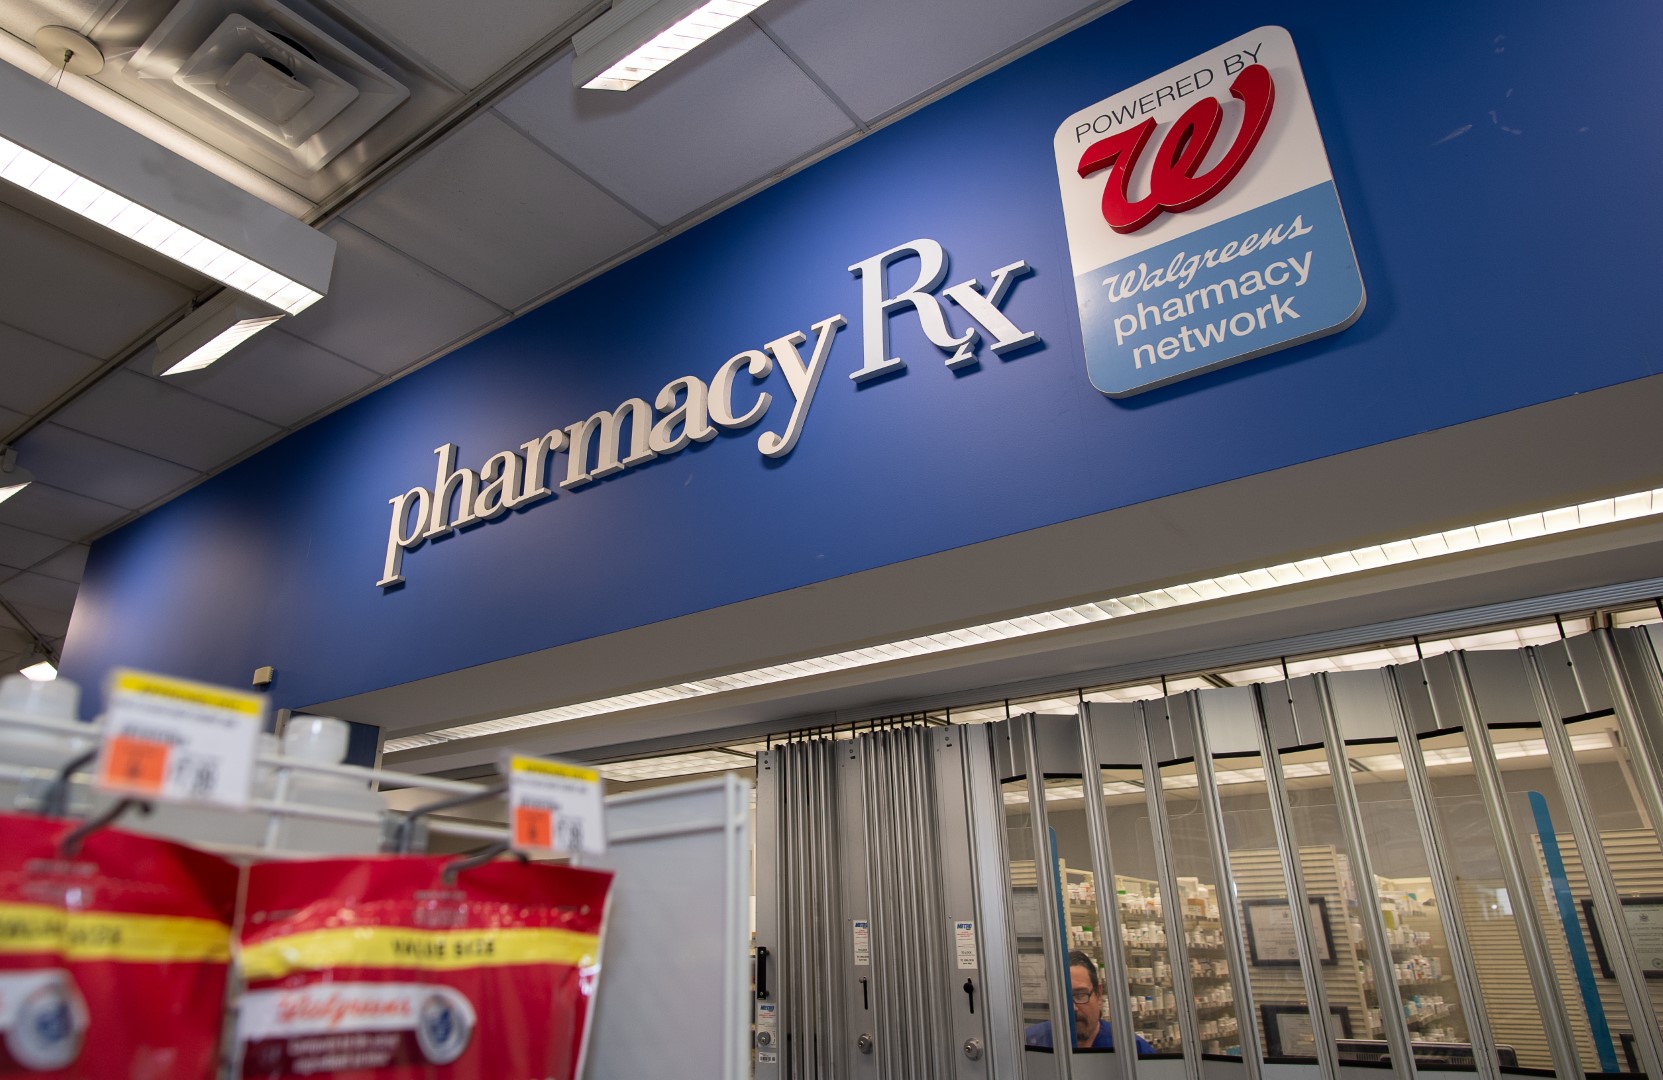 Interior of a pharmacy with "pharmacy rx" sign, featuring the walgreens logo, above the medication counter partially visible behind a display of products.